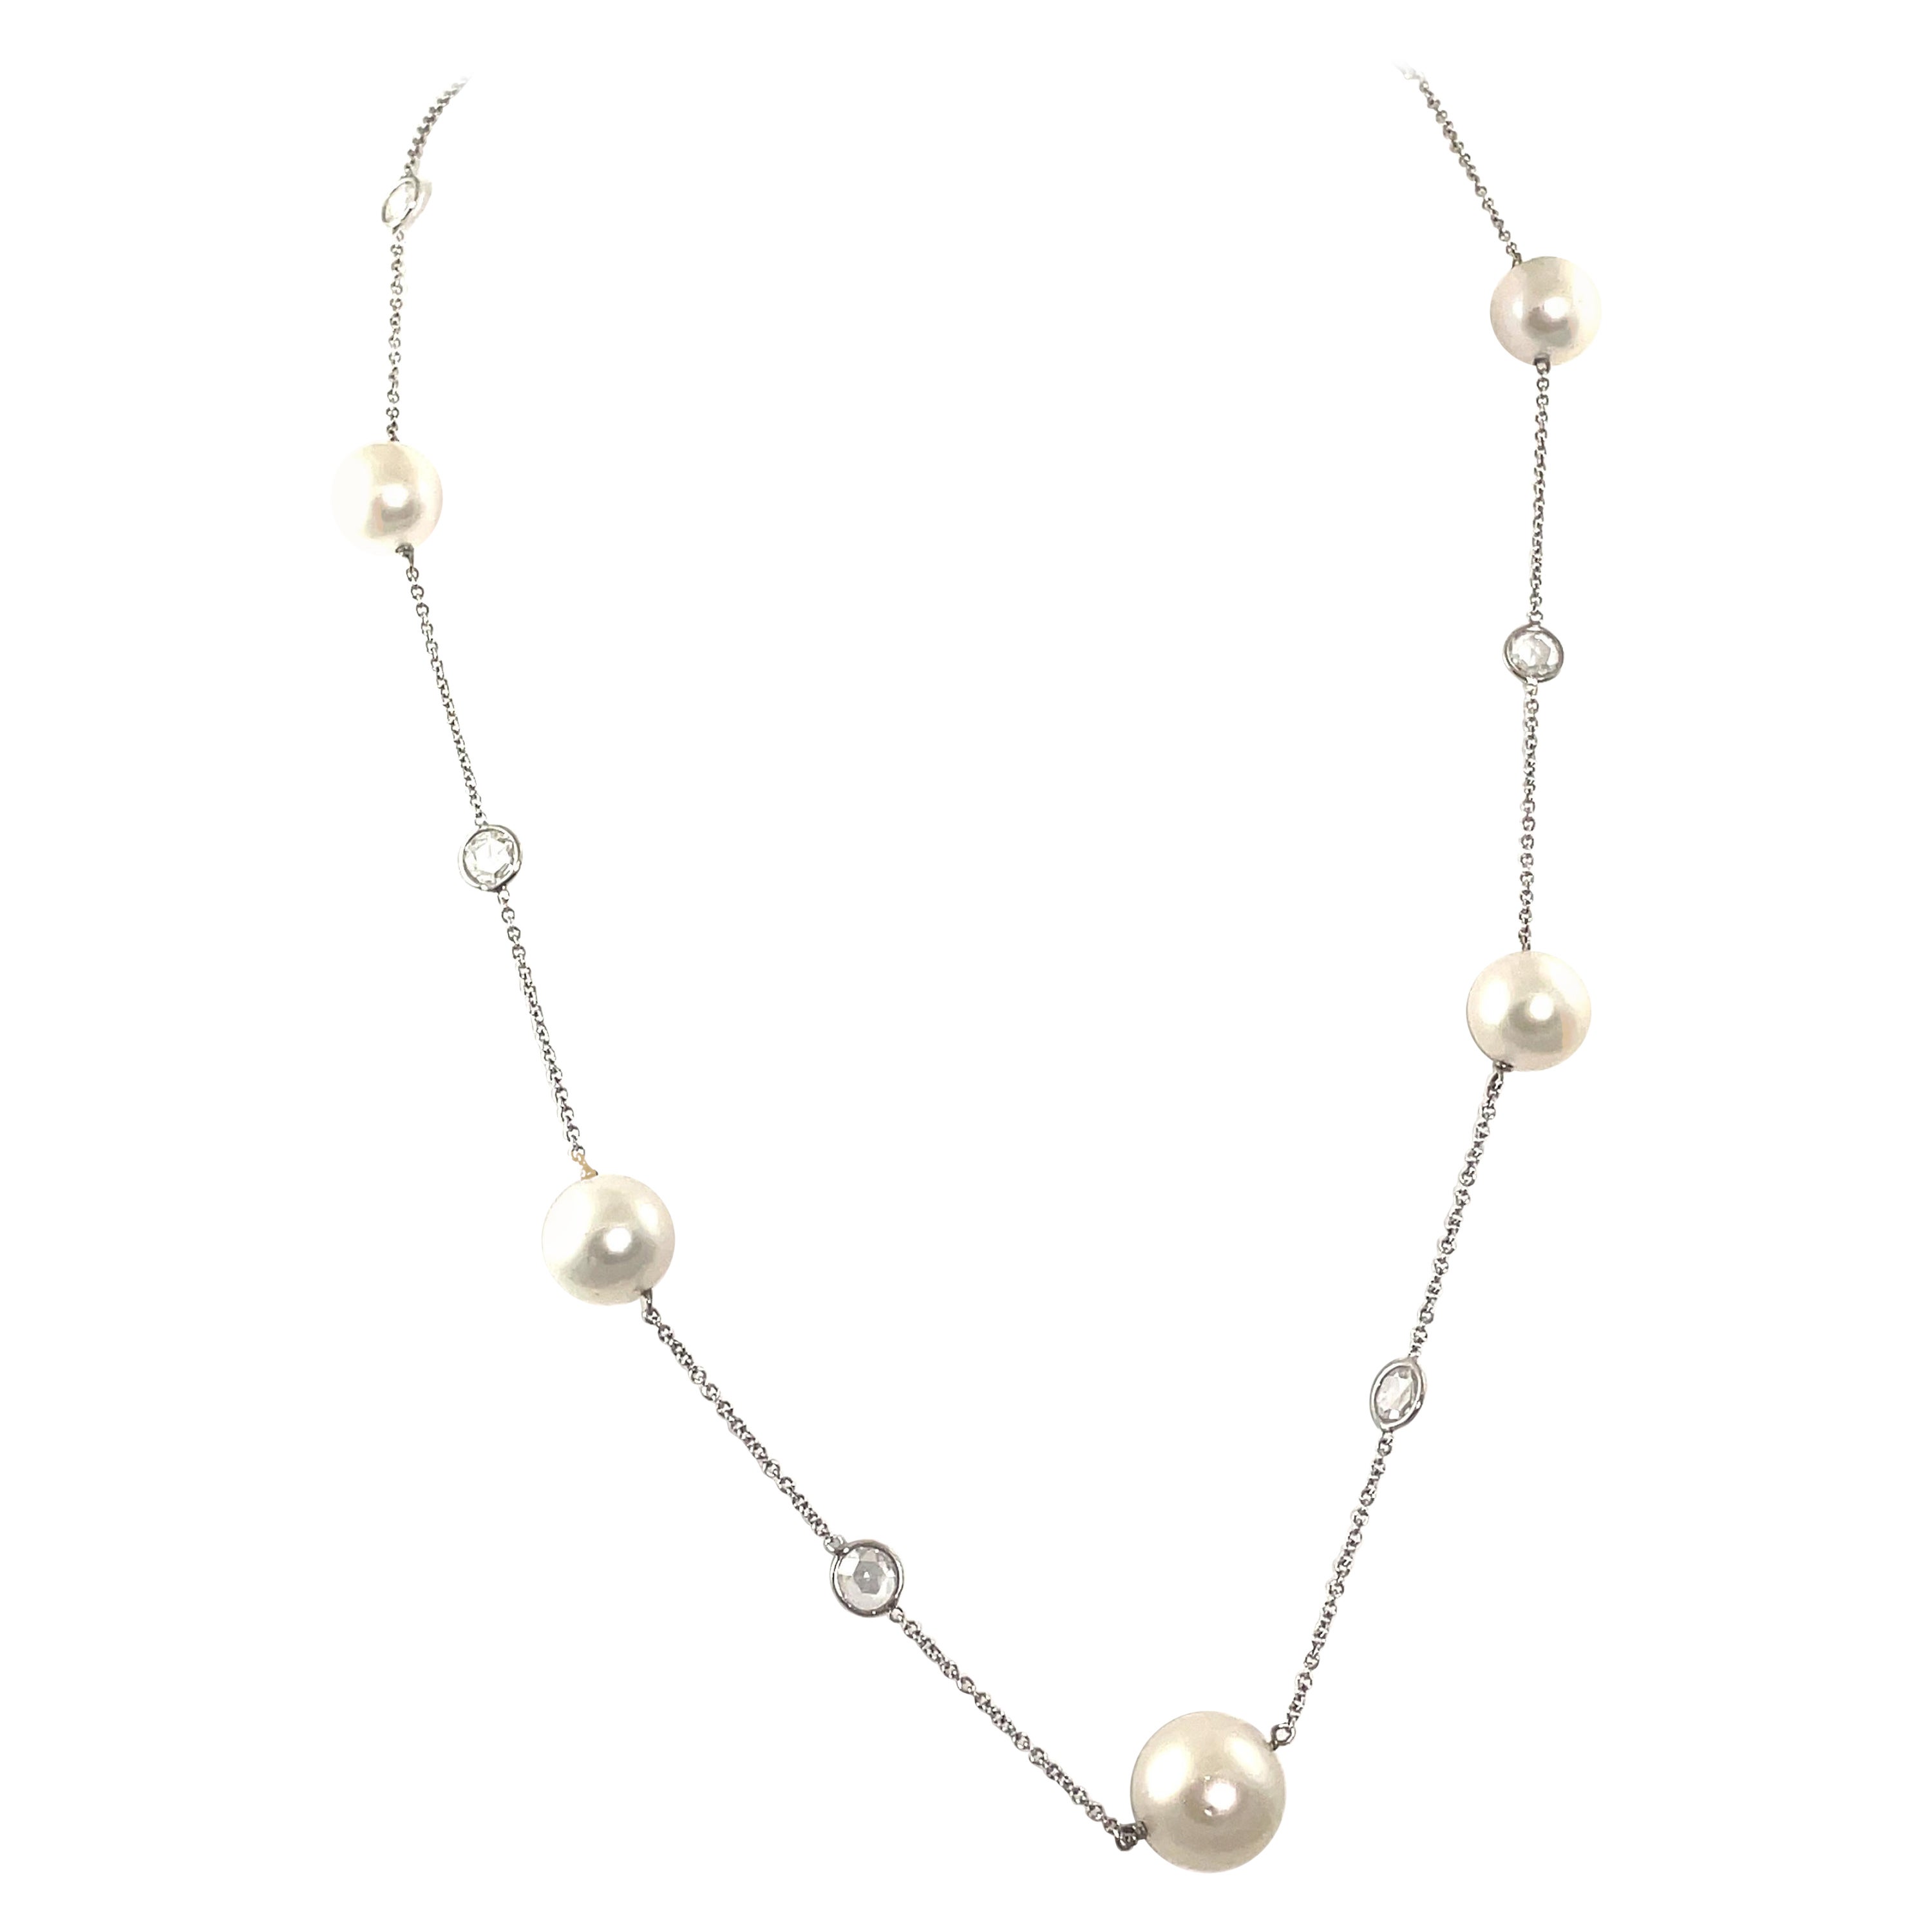 2.47ct Rose Cut Diamonds and Pearls by the Yard 18k White Gold For Sale